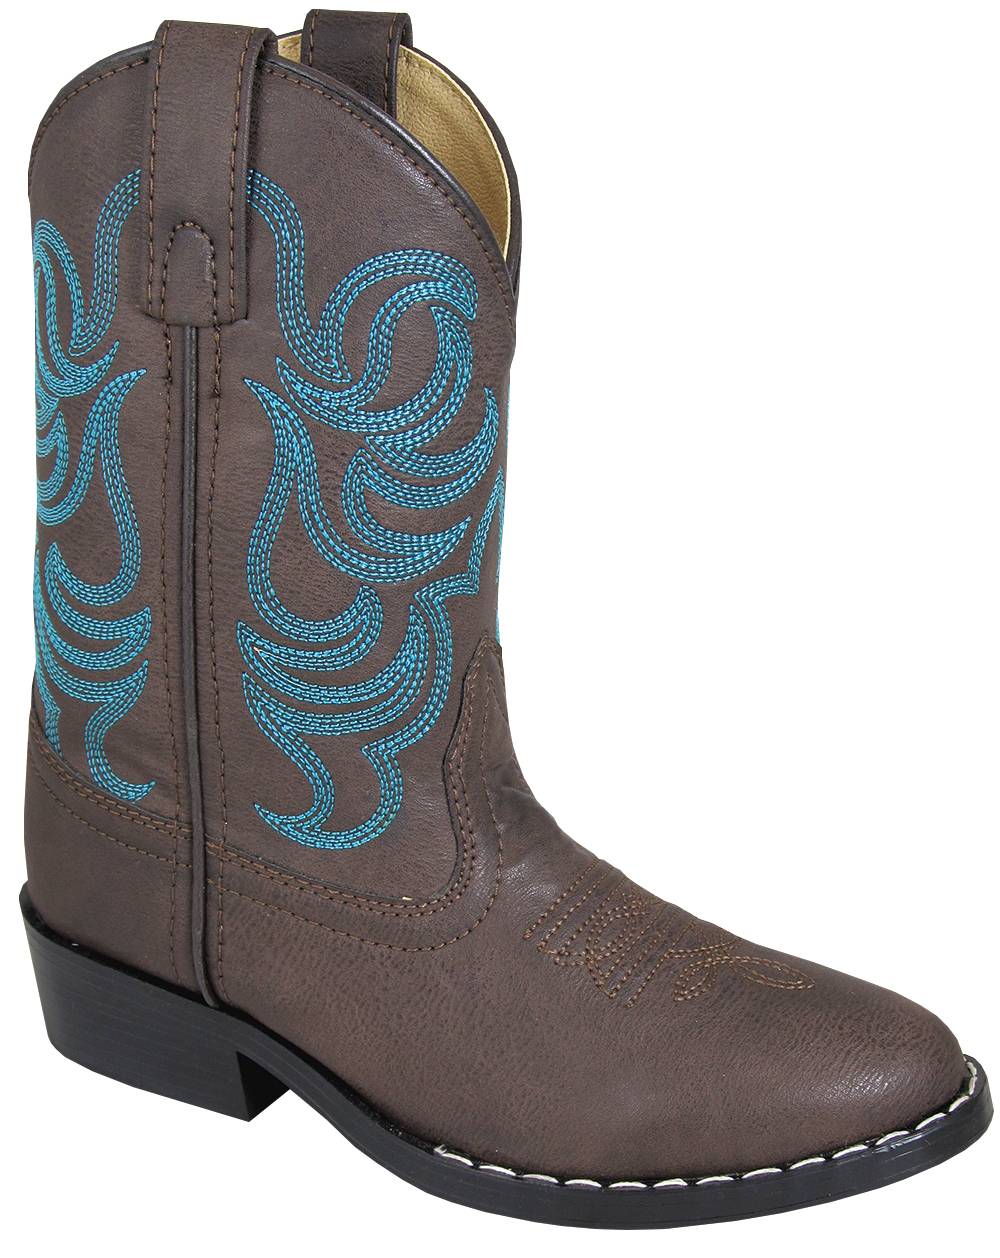 Smoky Mountain Childrens Monterey Boots Brown/Blue